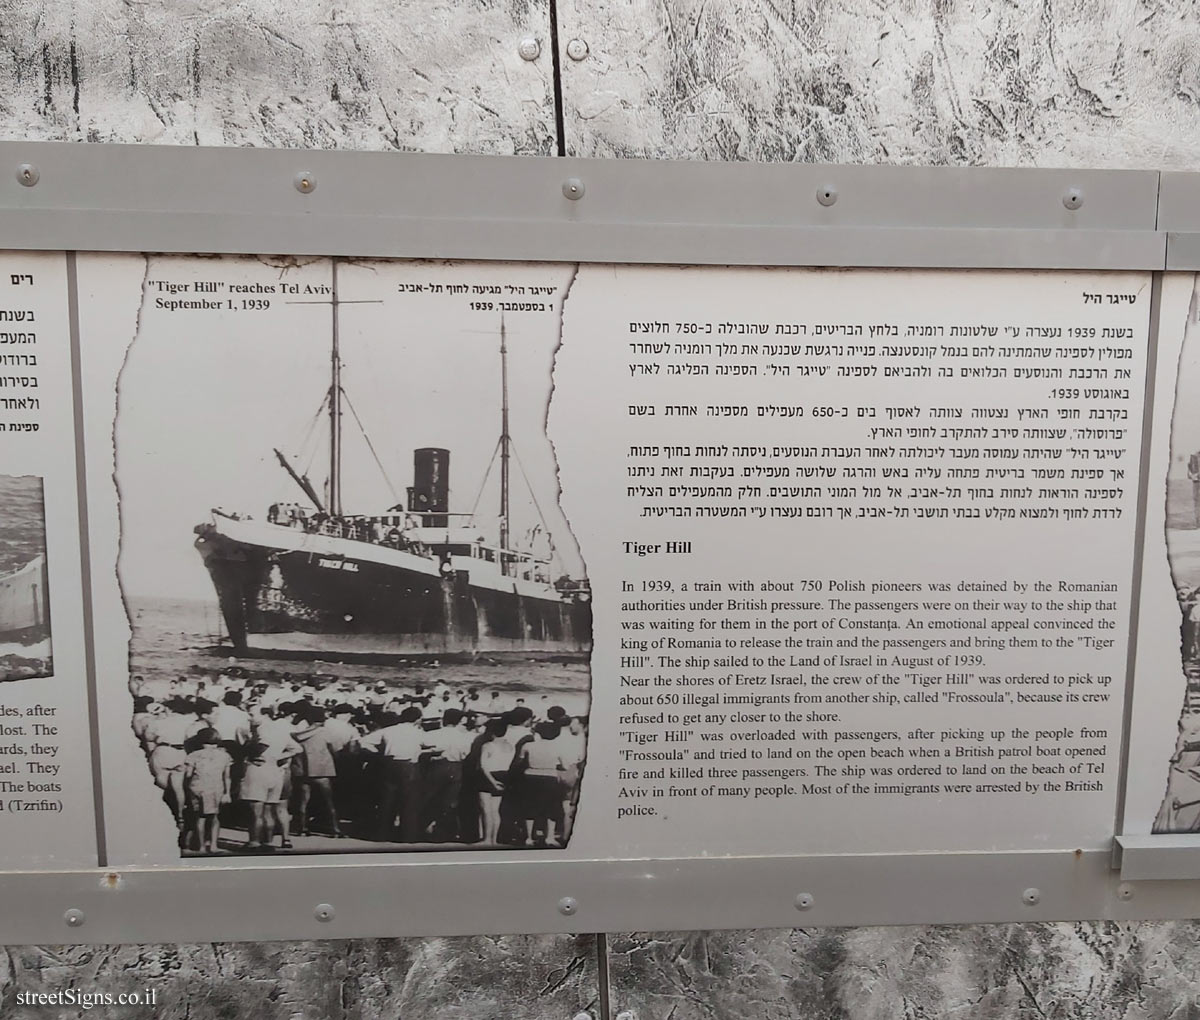 Tel Aviv - London Garden - The story of the illegal immigration - The ship "Tiger Hill"